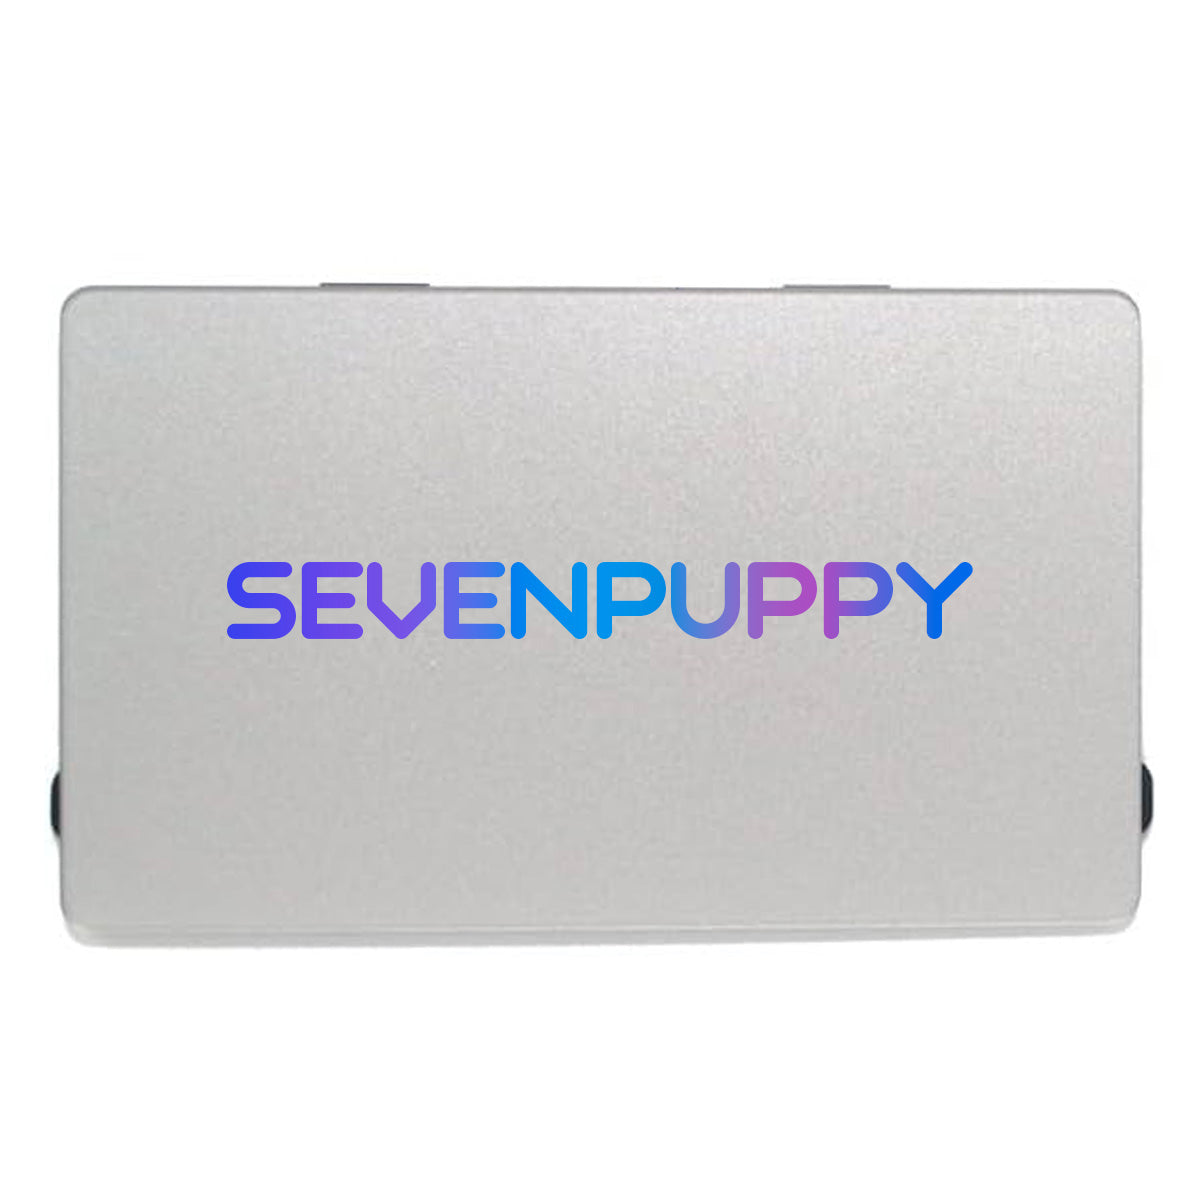 SEVEN PUPPY Brand NEW For MacBook Pro 11" A1465 2011-2012 Year Laptop Display Trackpad + Touch Bar Set